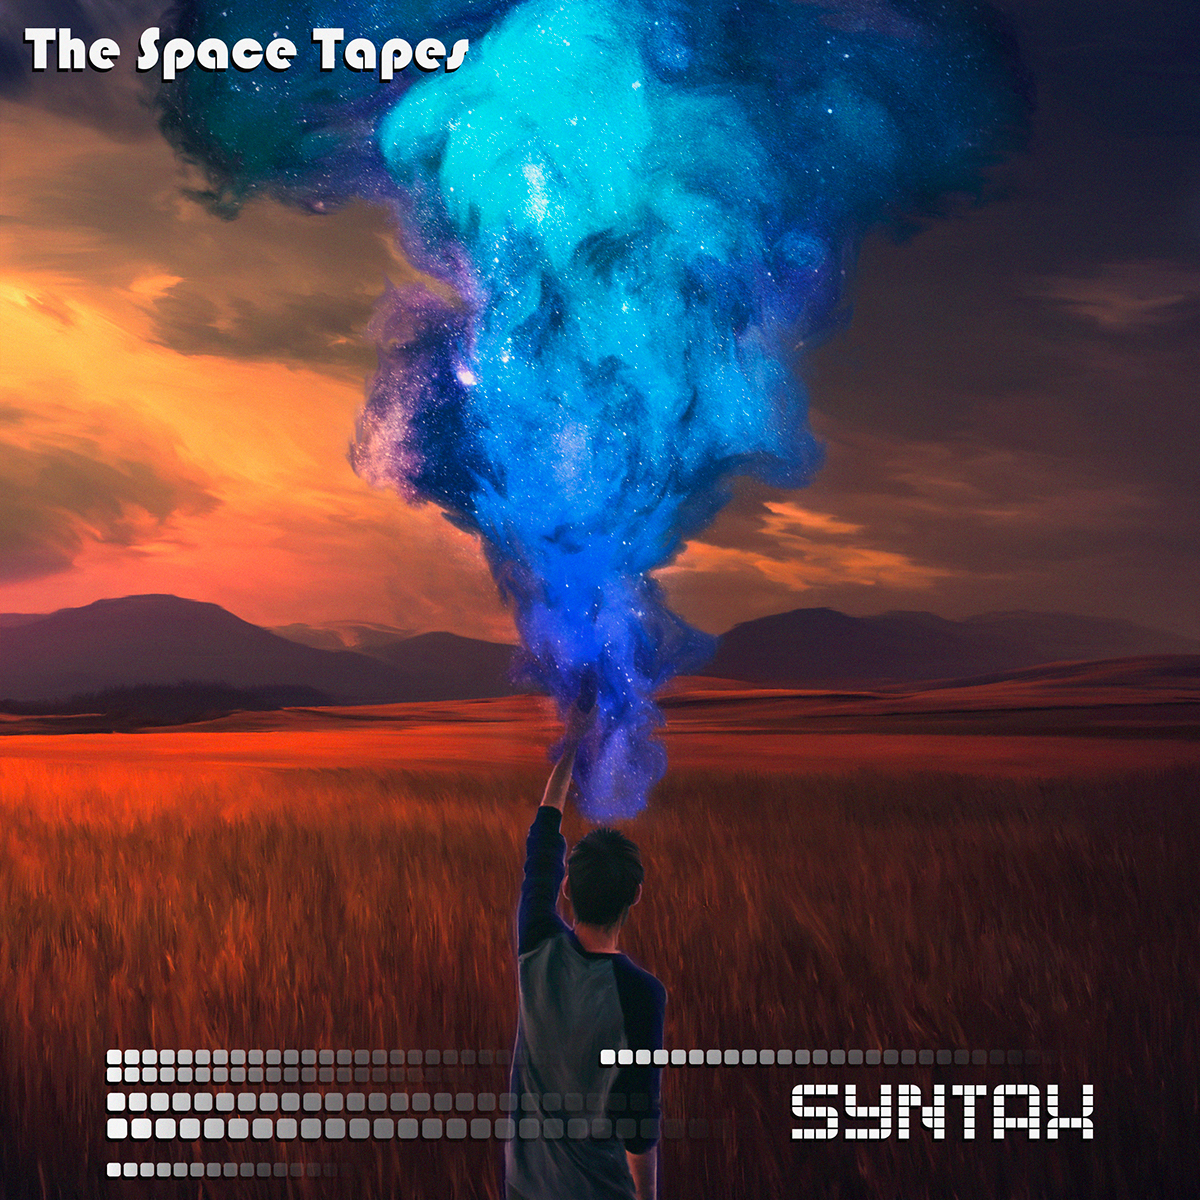 Album Cover Design - The Space Tapes on Behance